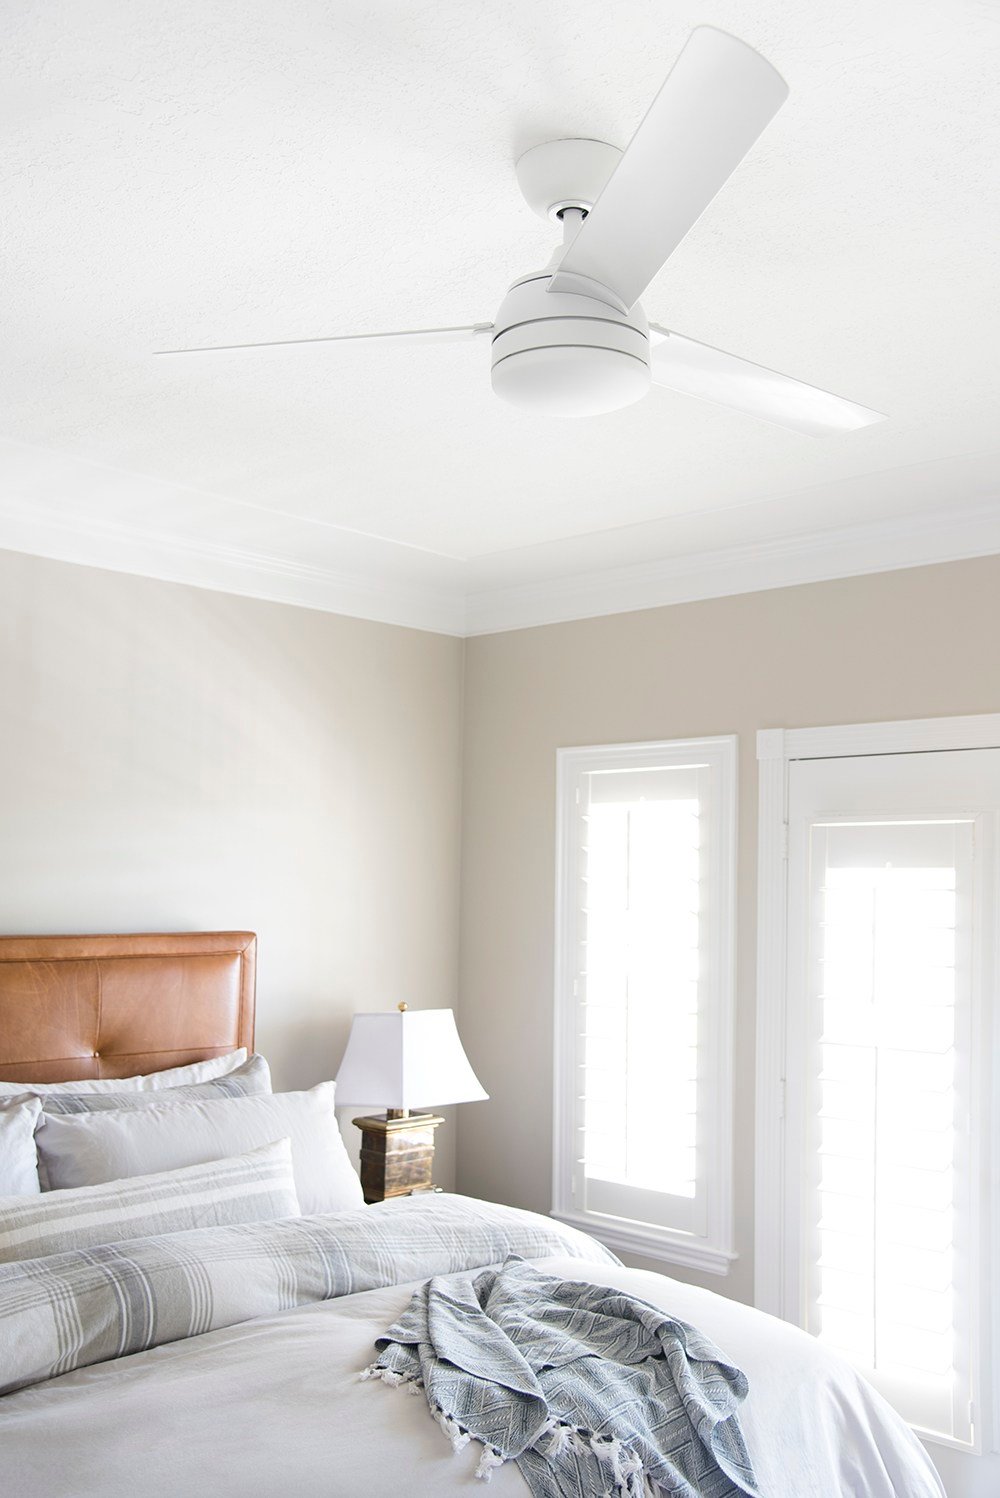 Roundup : White Ceiling Fans - roomfortuesday.com